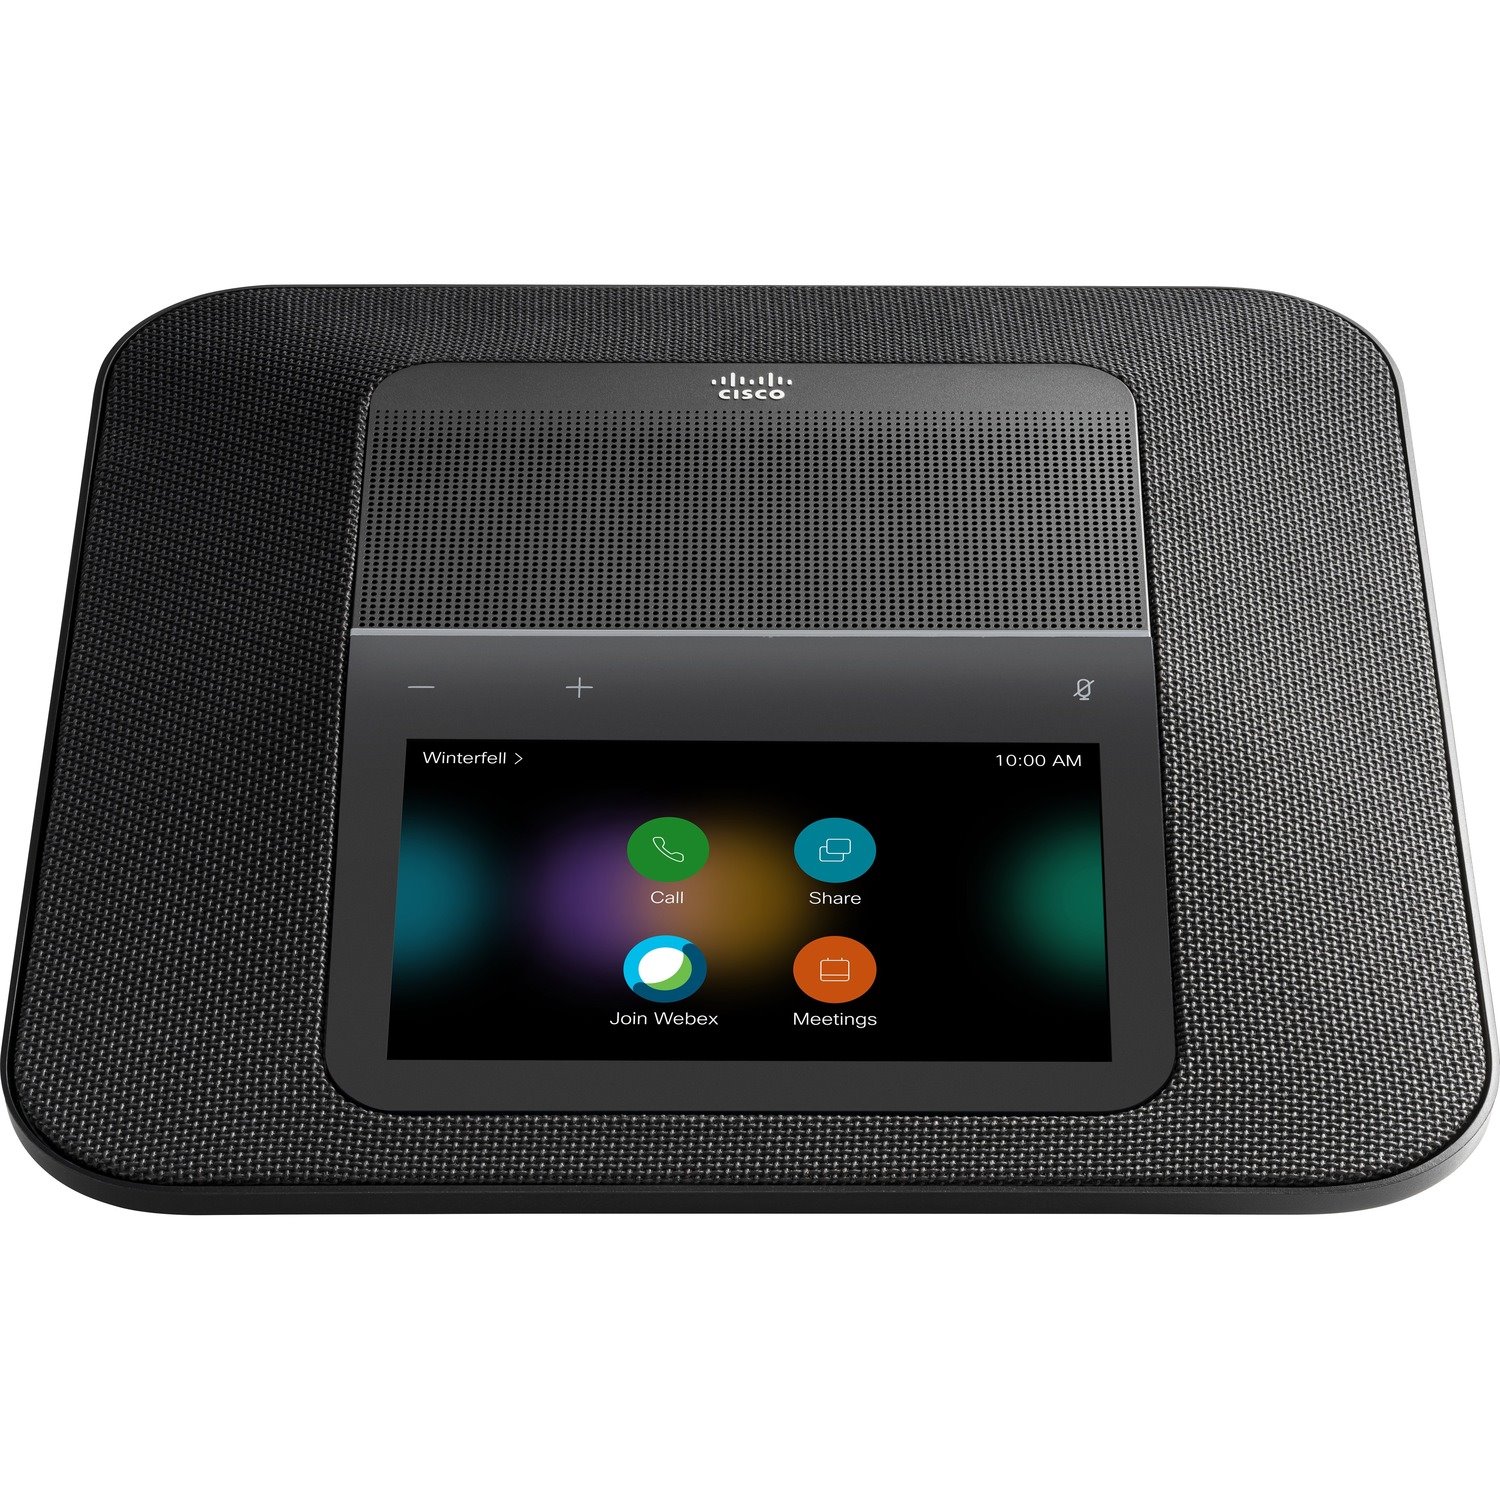 Cisco Webex IP Conference Station - Corded - Carbon Black